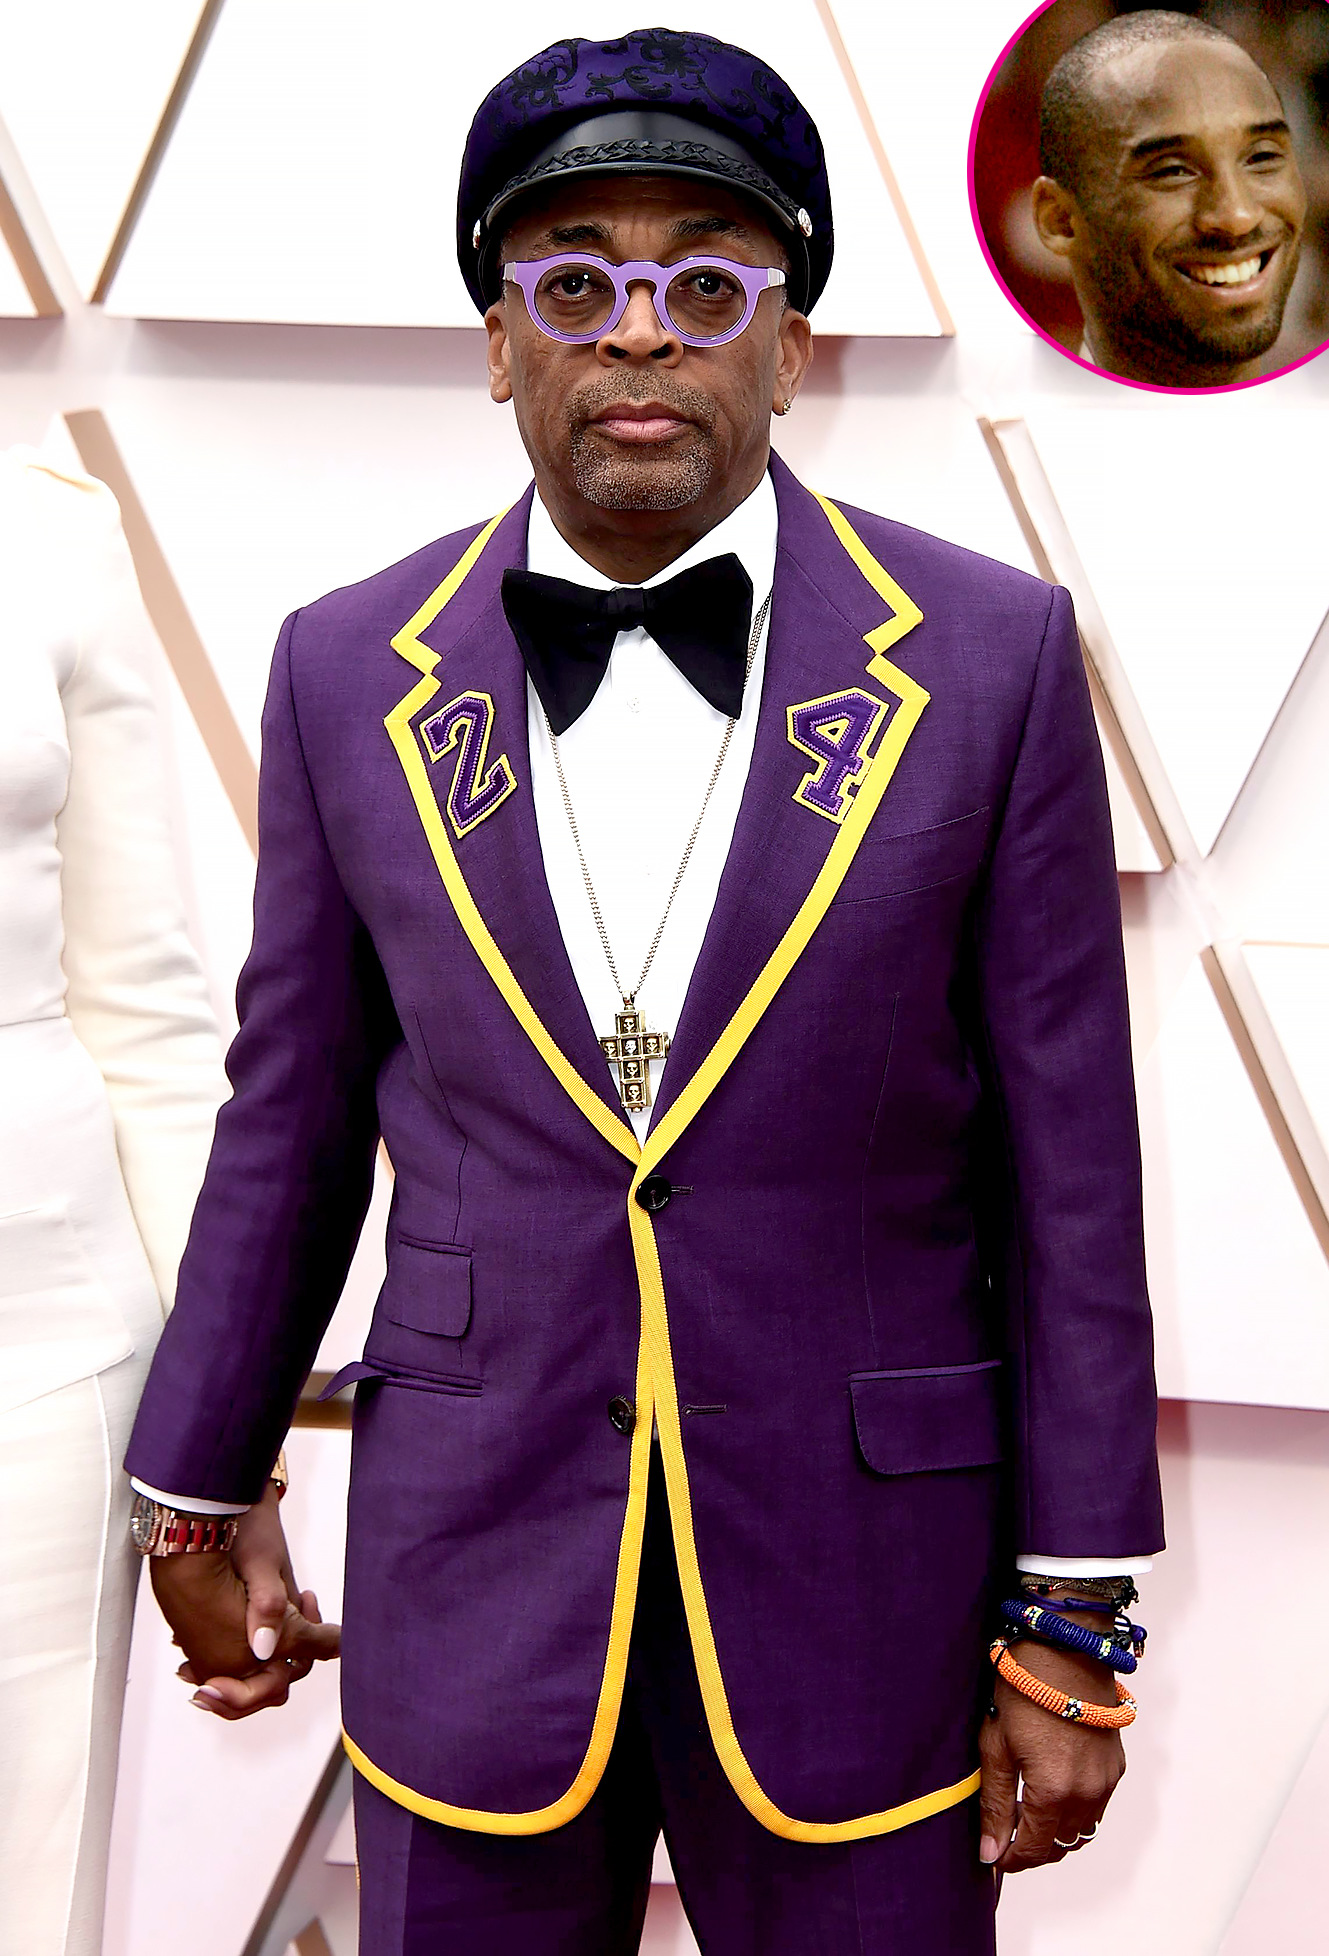 Oscars 2020 Red Carpet: Director Spike Lee pays tribute to Kobe Bryant,  wears Lakers-colored tuxedo